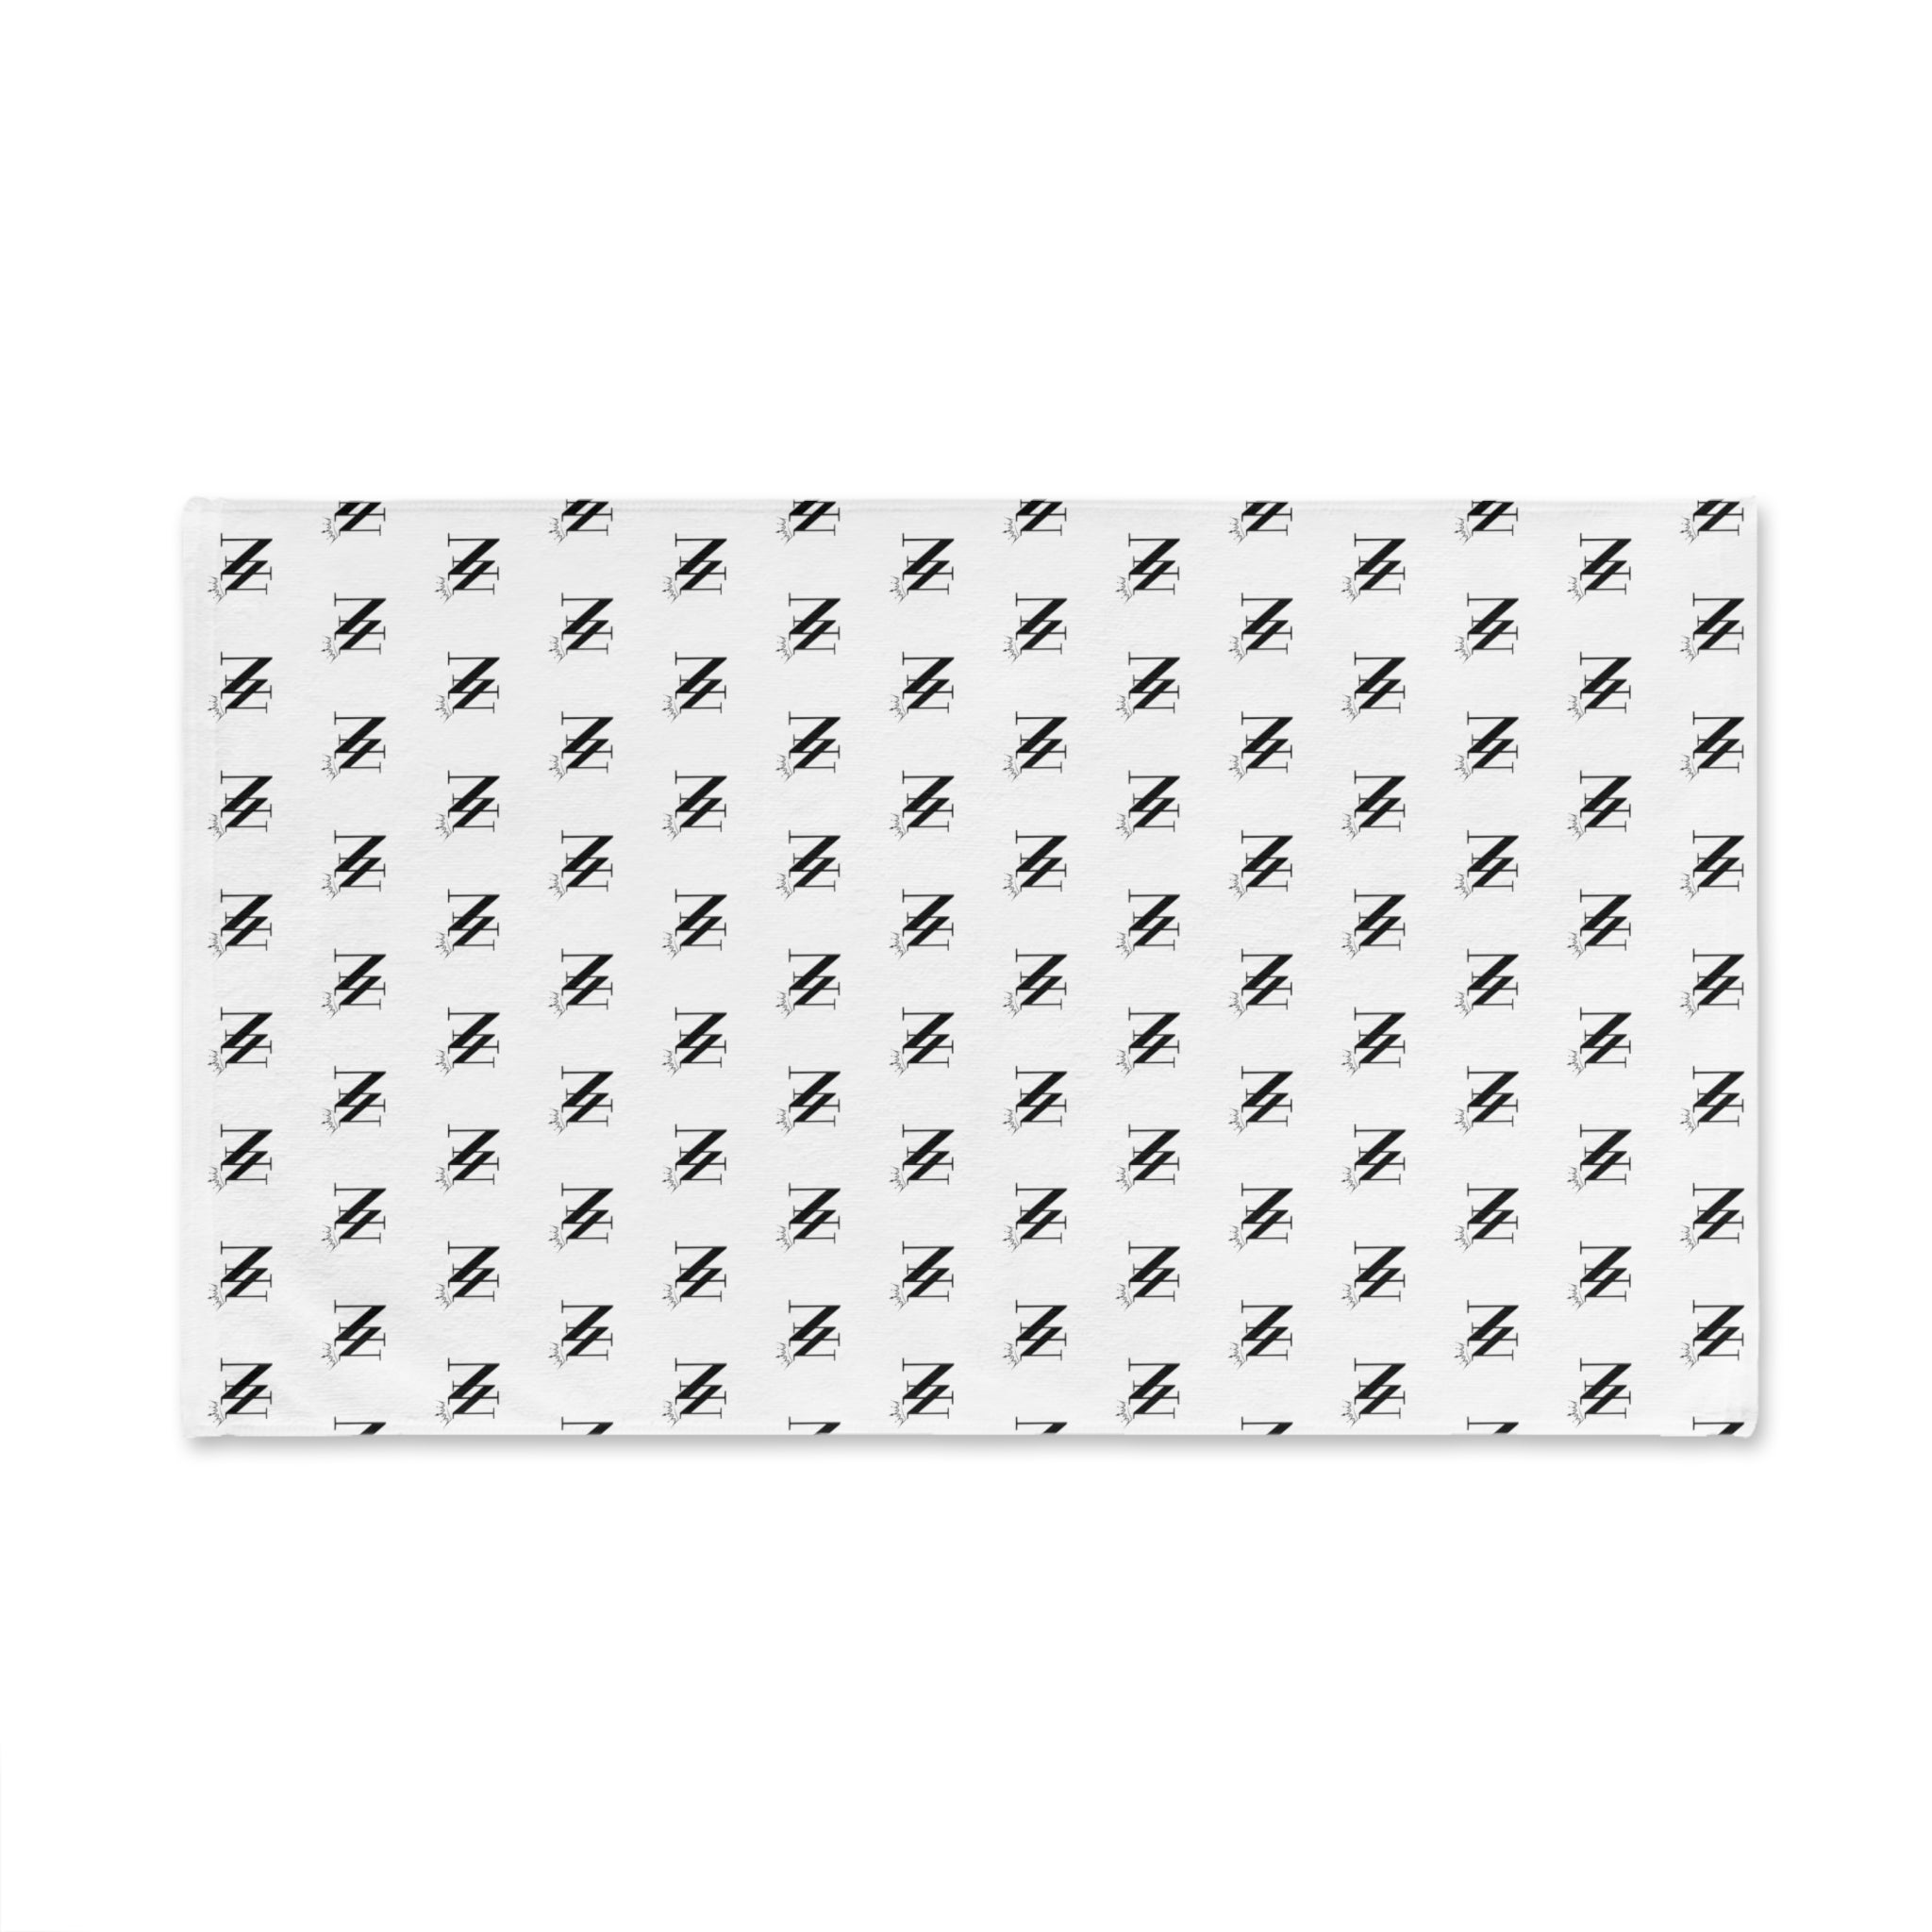 Pattern  Logo White | Funny Gifts for Men - Gifts for Him - Birthday Gifts for Men, Him, Her, Husband, Boyfriend, Girlfriend, New Couple Gifts, Fathers & Valentines Day Gifts, Christmas Gifts NECTAR NAPKINS